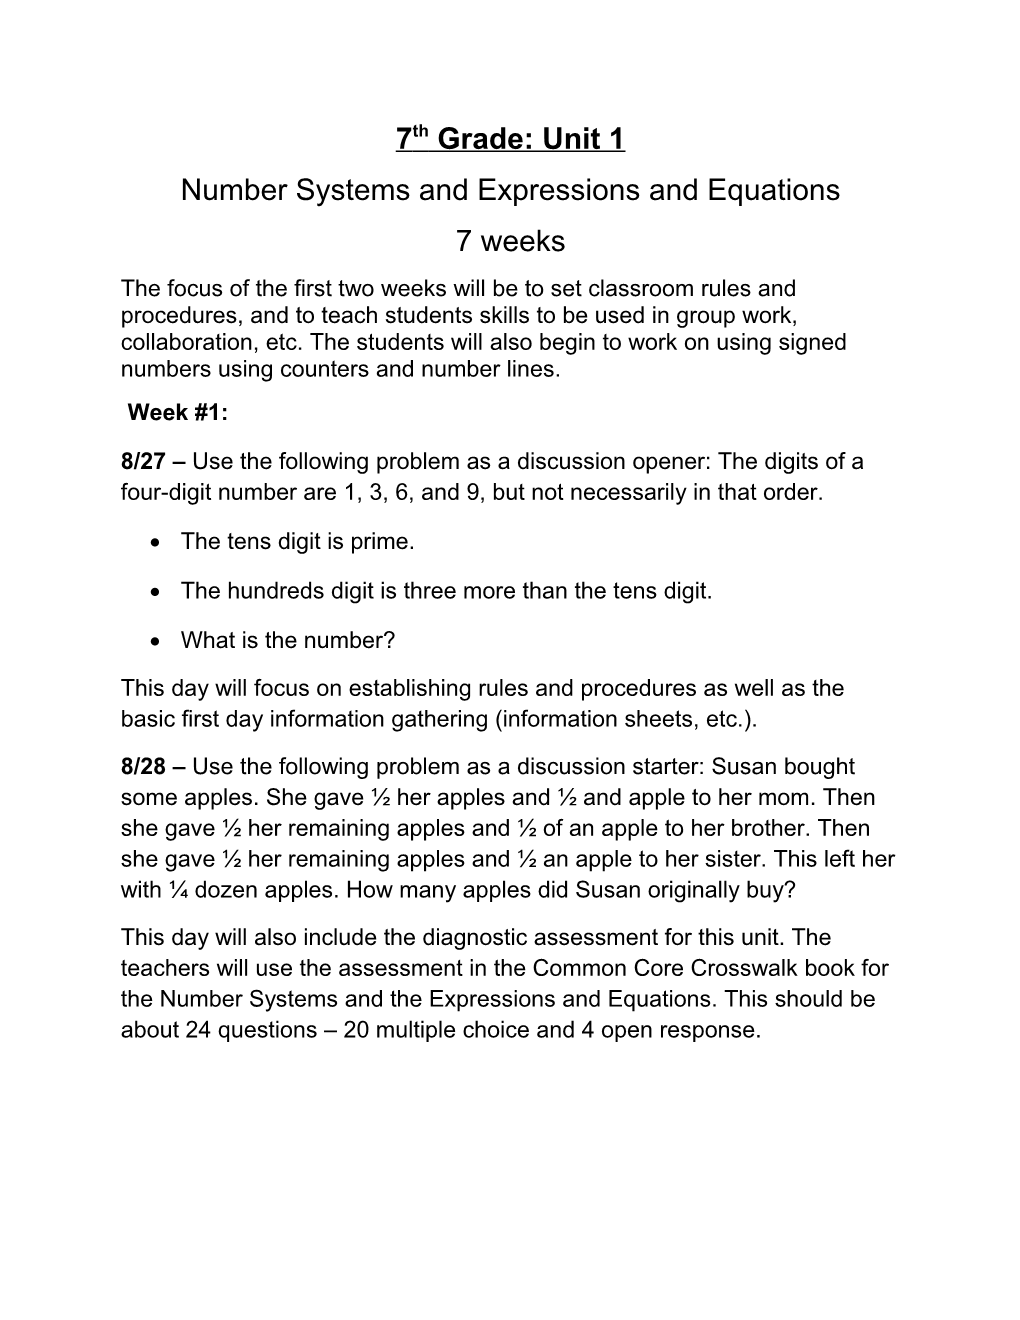 Number Systems and Expressions and Equations